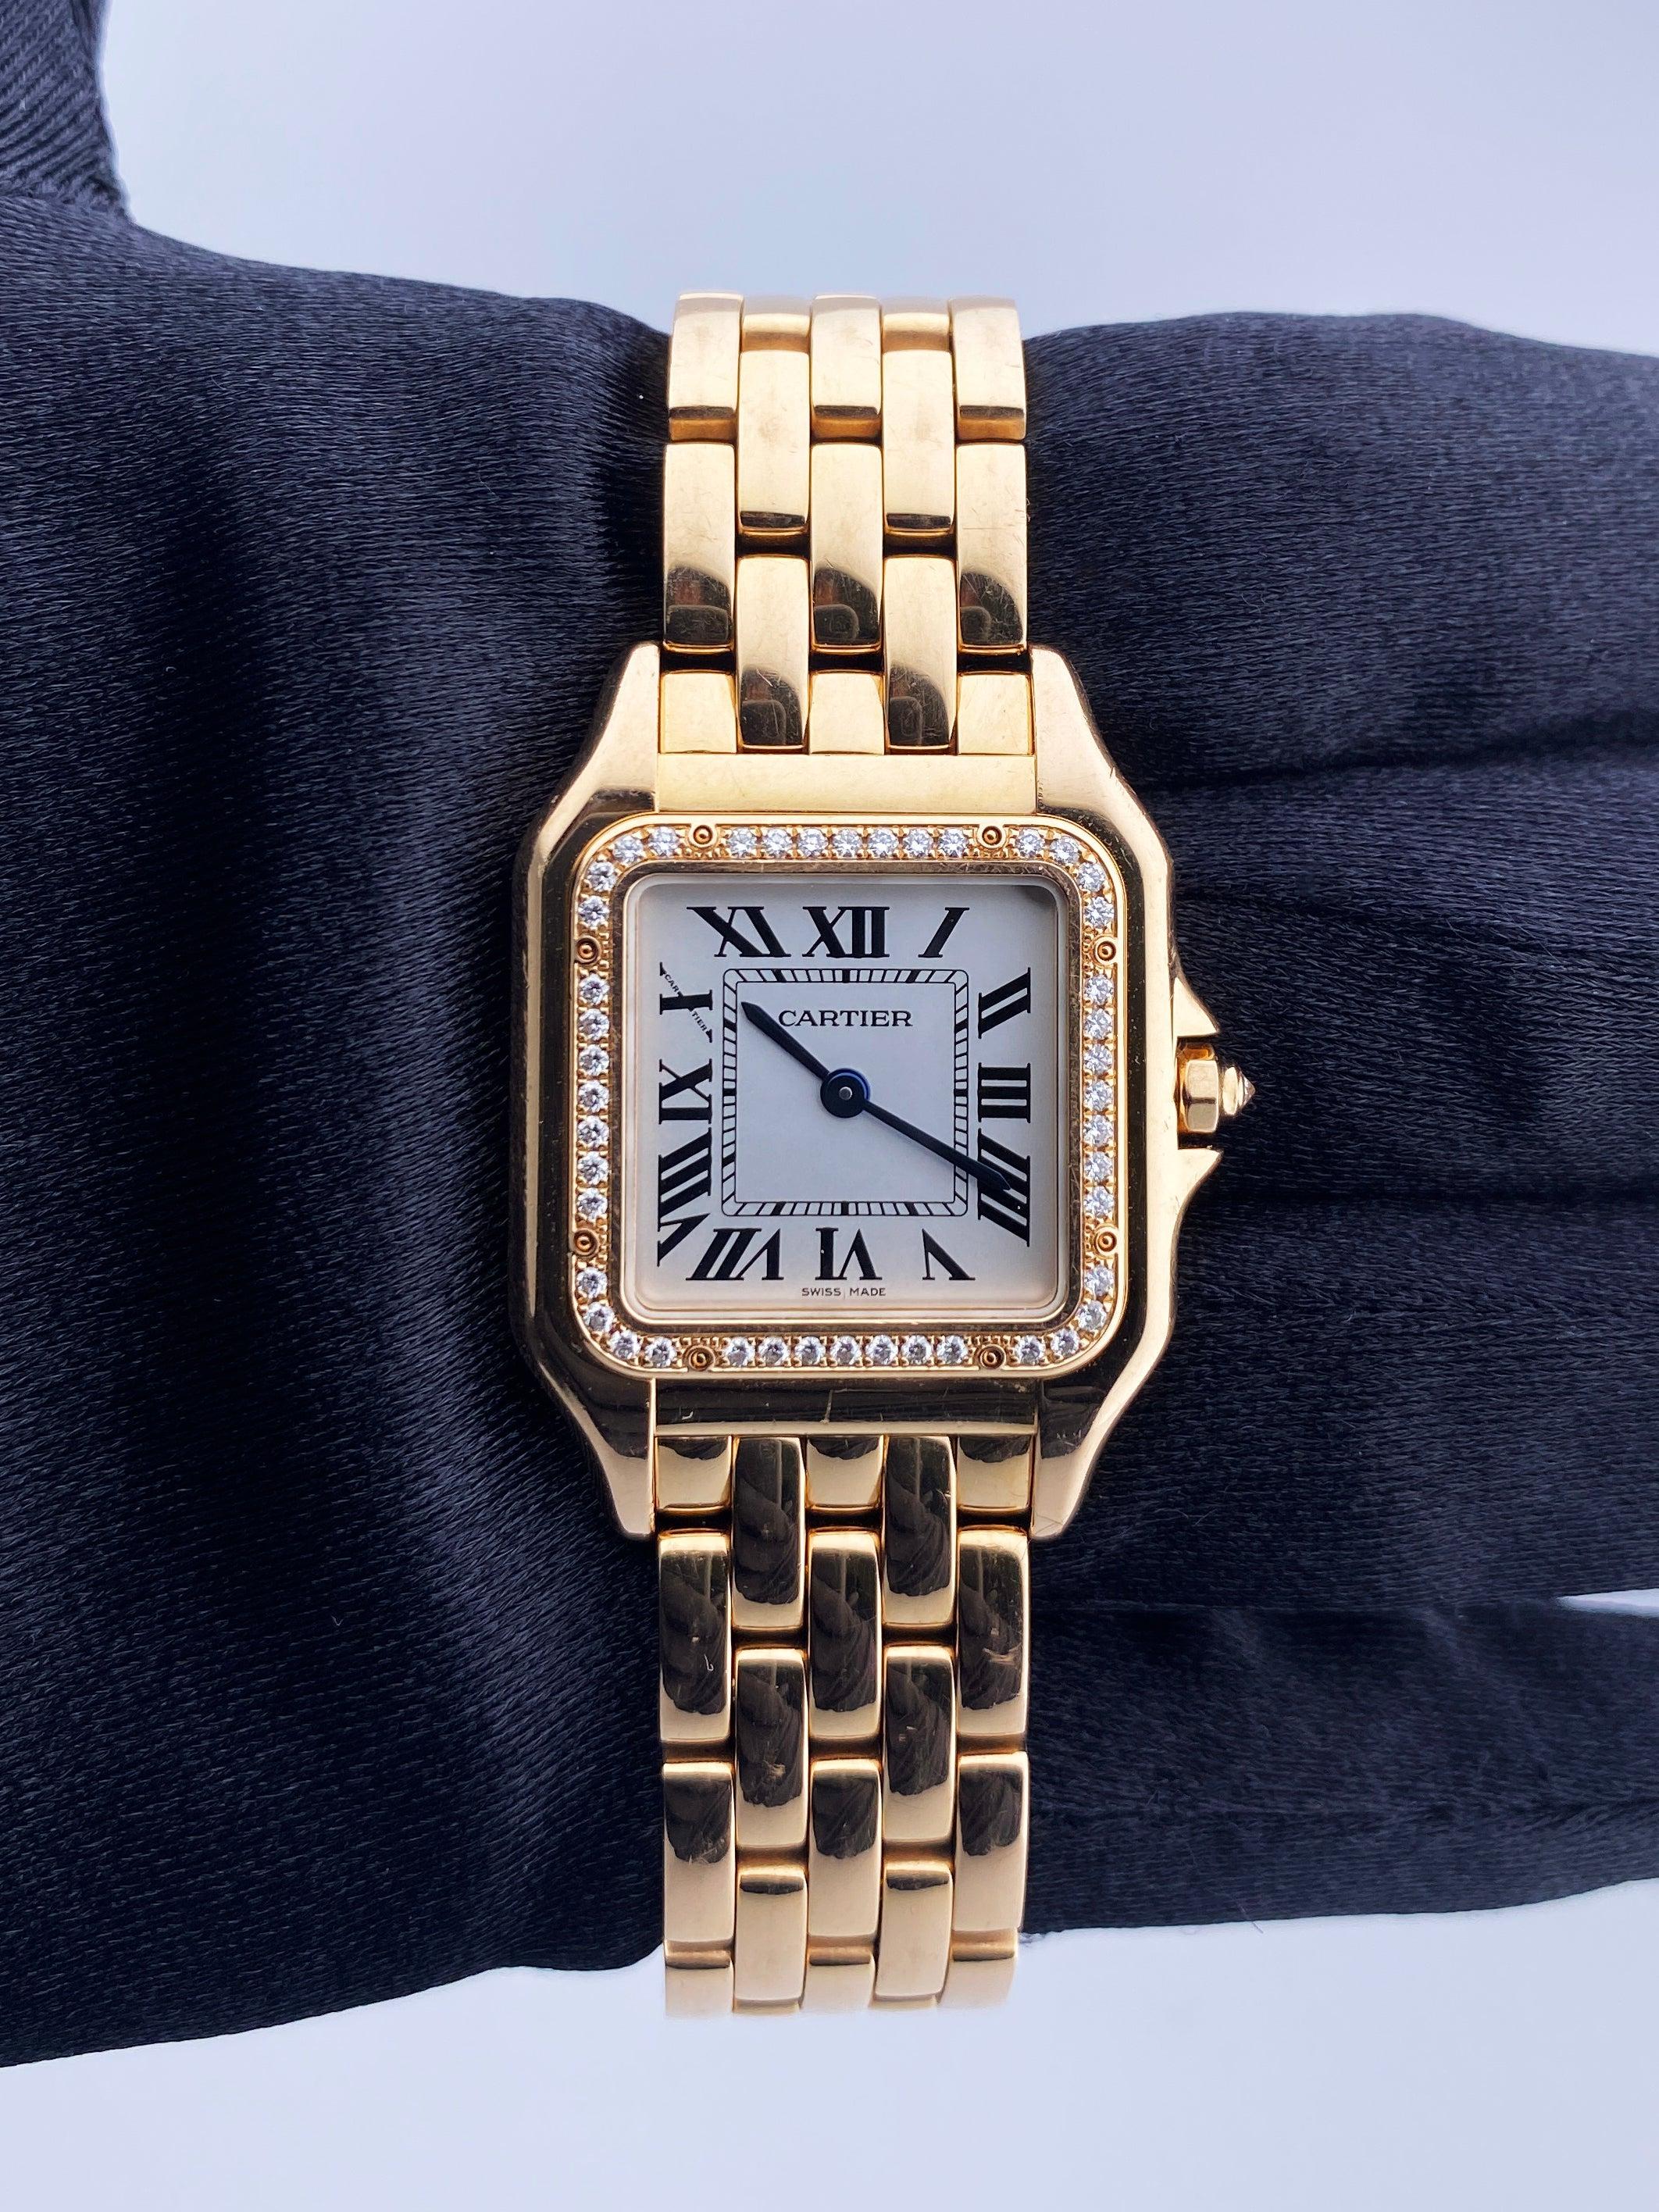 Cartier Panthere WJPN0009 Ladies Watch. 27mm 18K rose gold case. 18K rose gold  bezel with original factory diamond set. Silver dial with blue steel hands and black Roman numeral hour markers. Minute markers on the inner dial. 18k rose gold bracelet